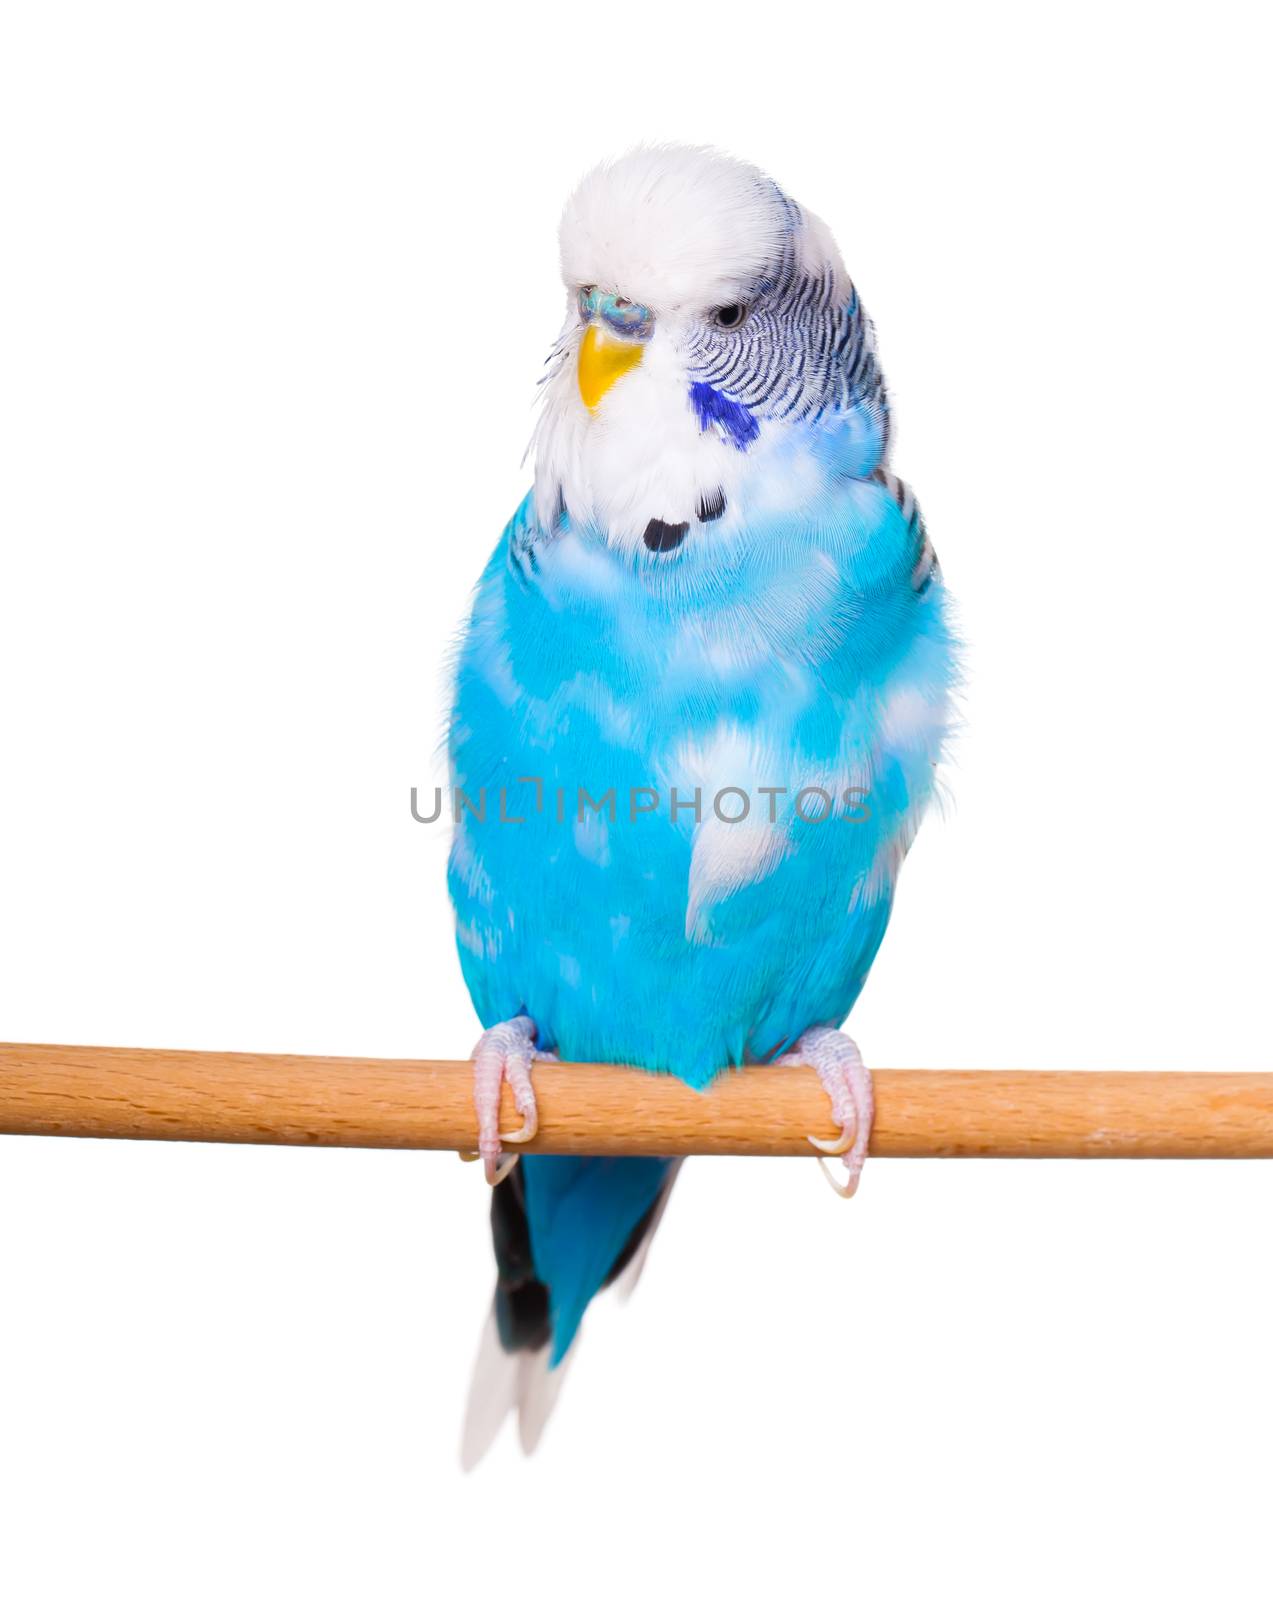 Budgie on the white backgro